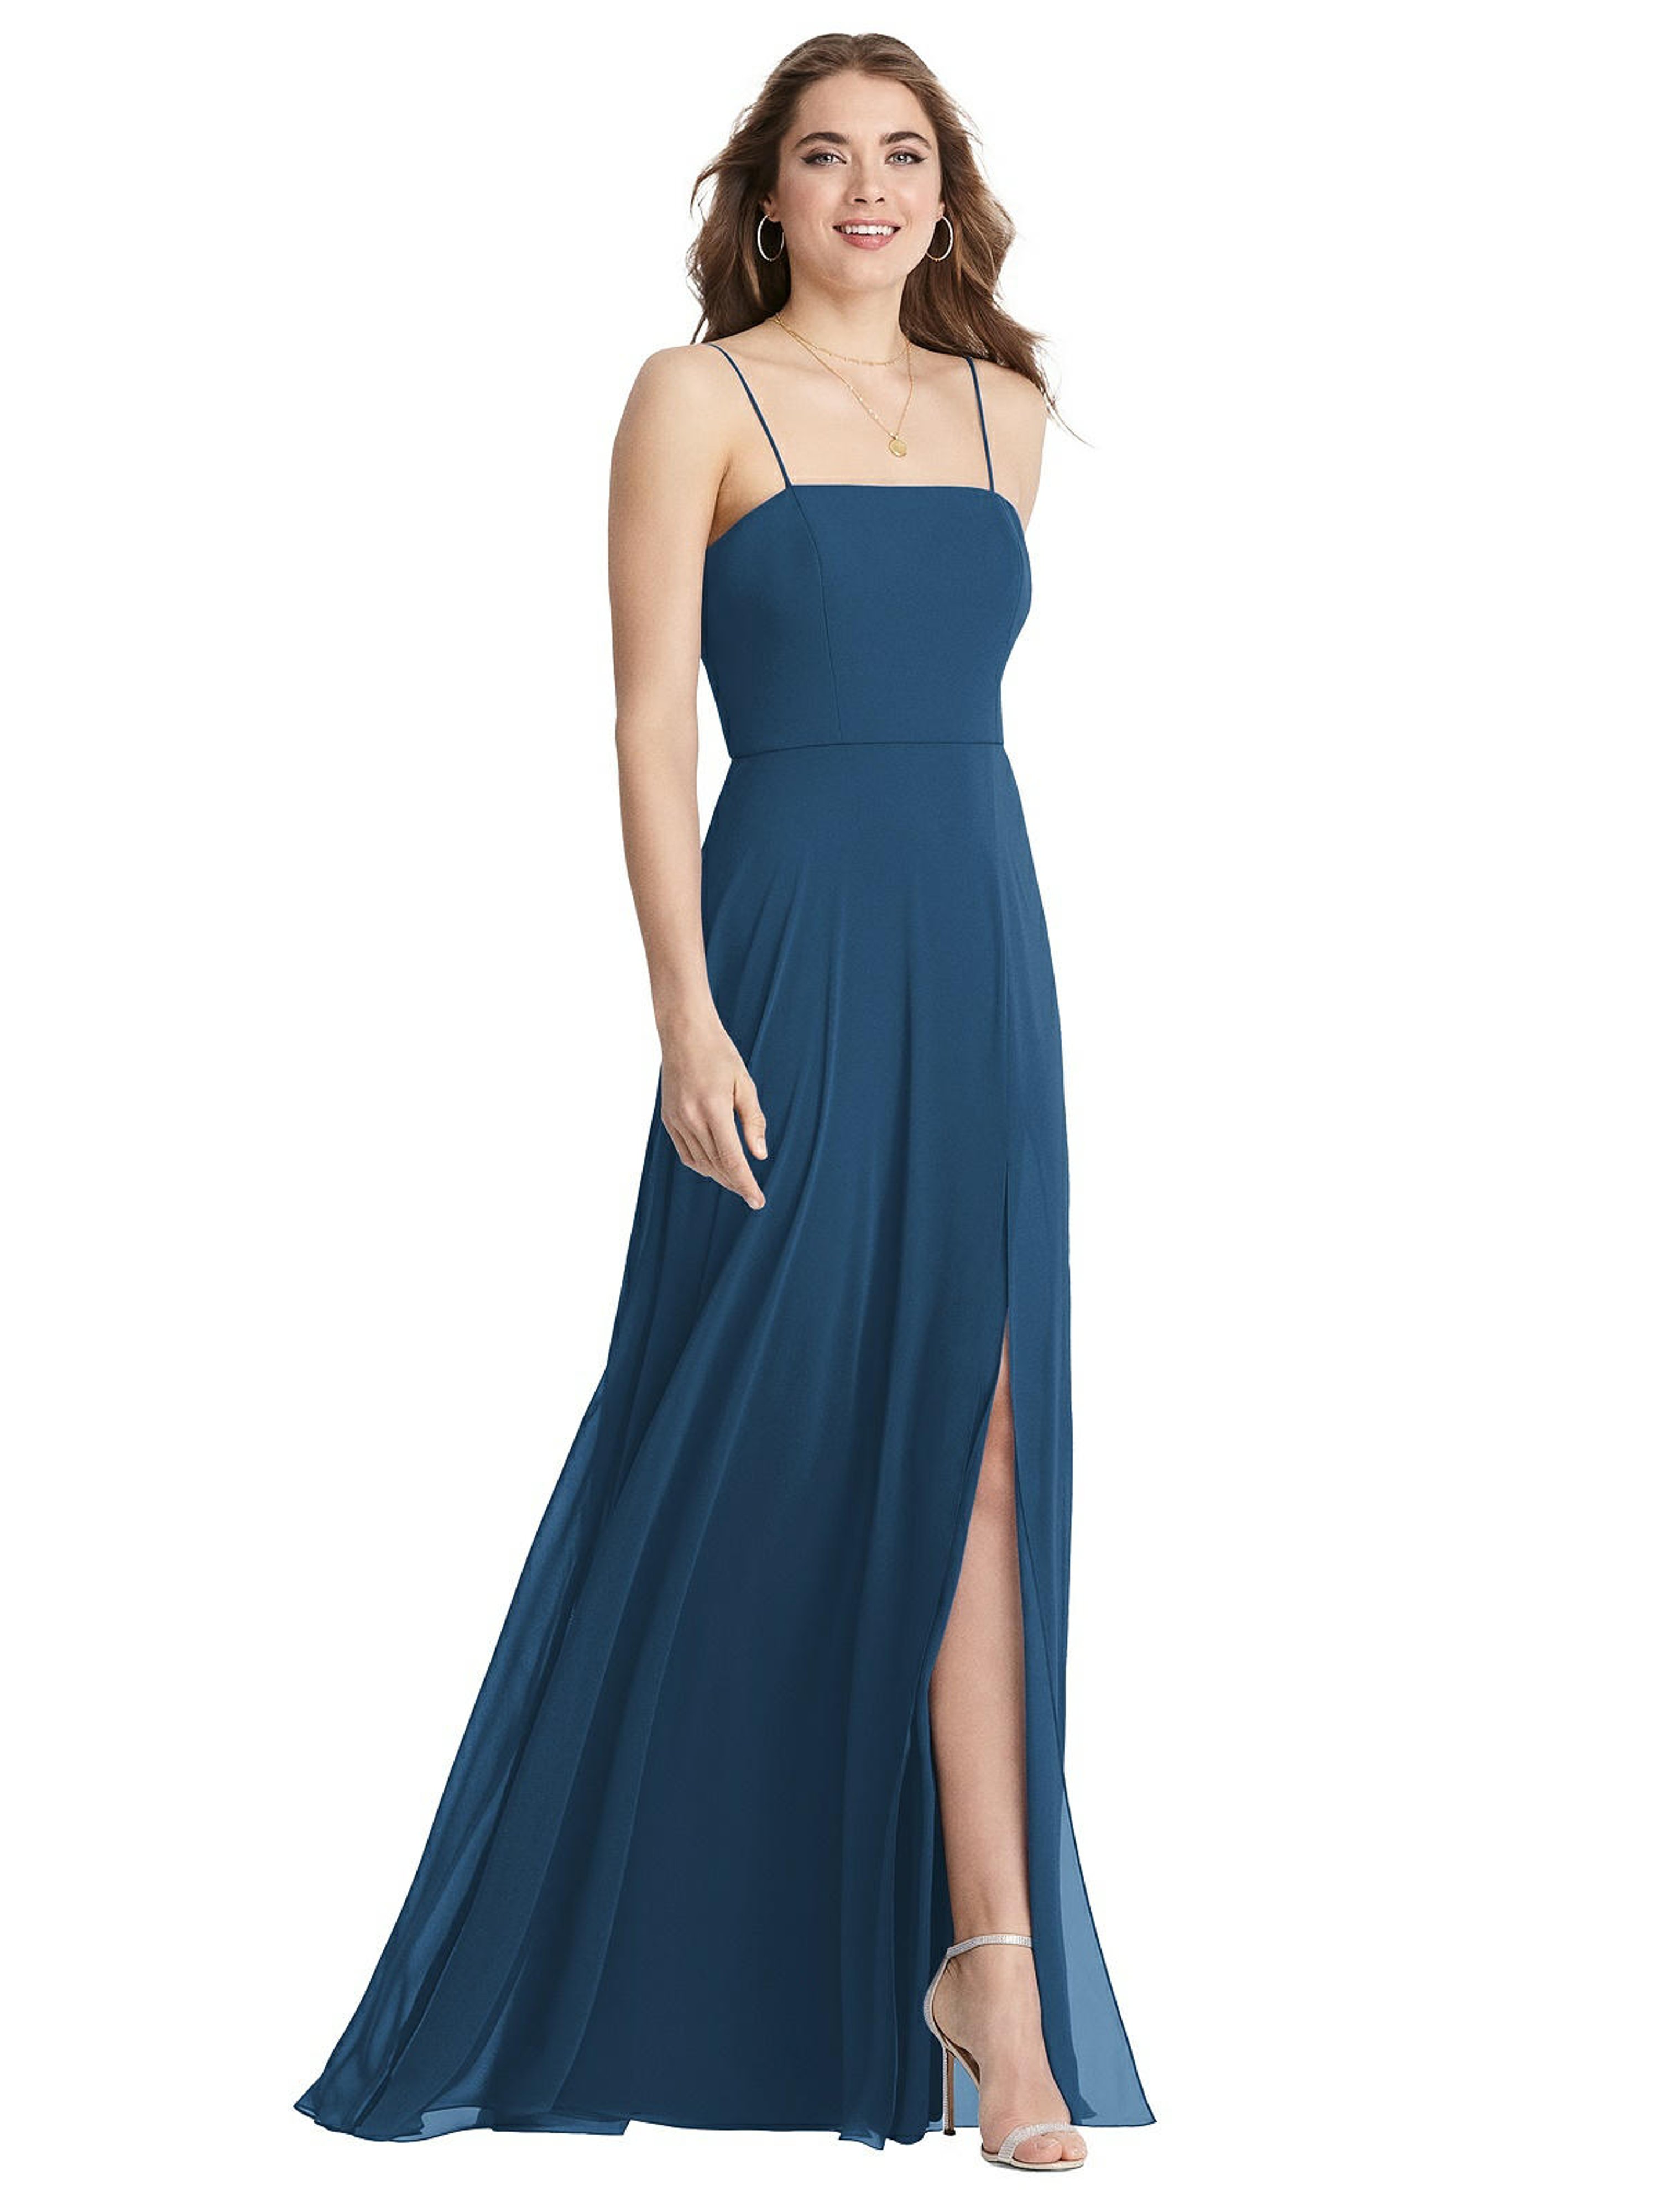 LOVELY LOVELY SQUARE NECK CHIFFON MAXI DRESS WITH FRONT SLIT